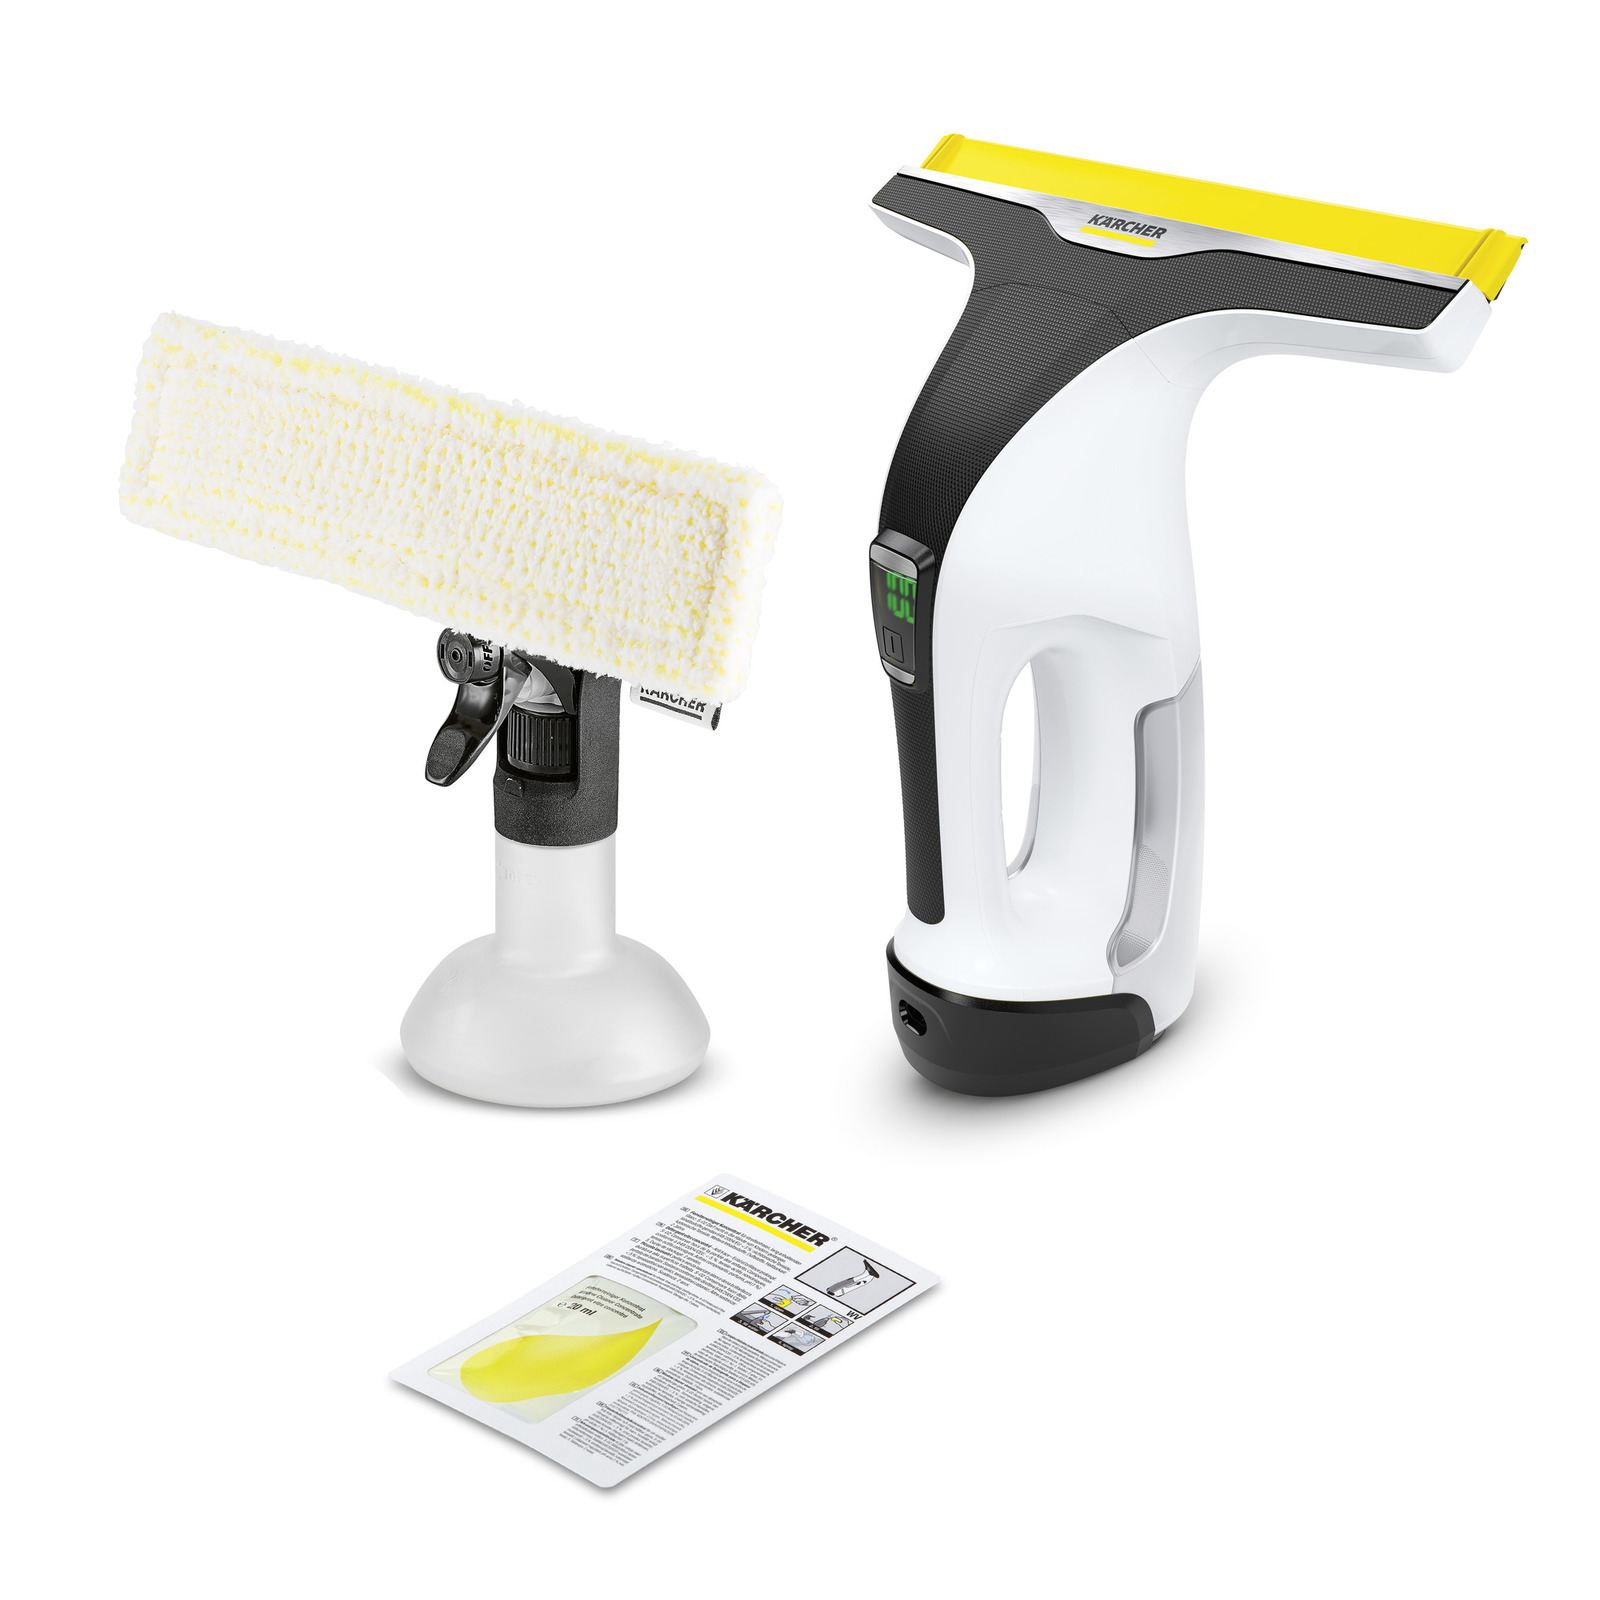 Karcher WV 6 Plus Rechargeable Window Cleaner Vac